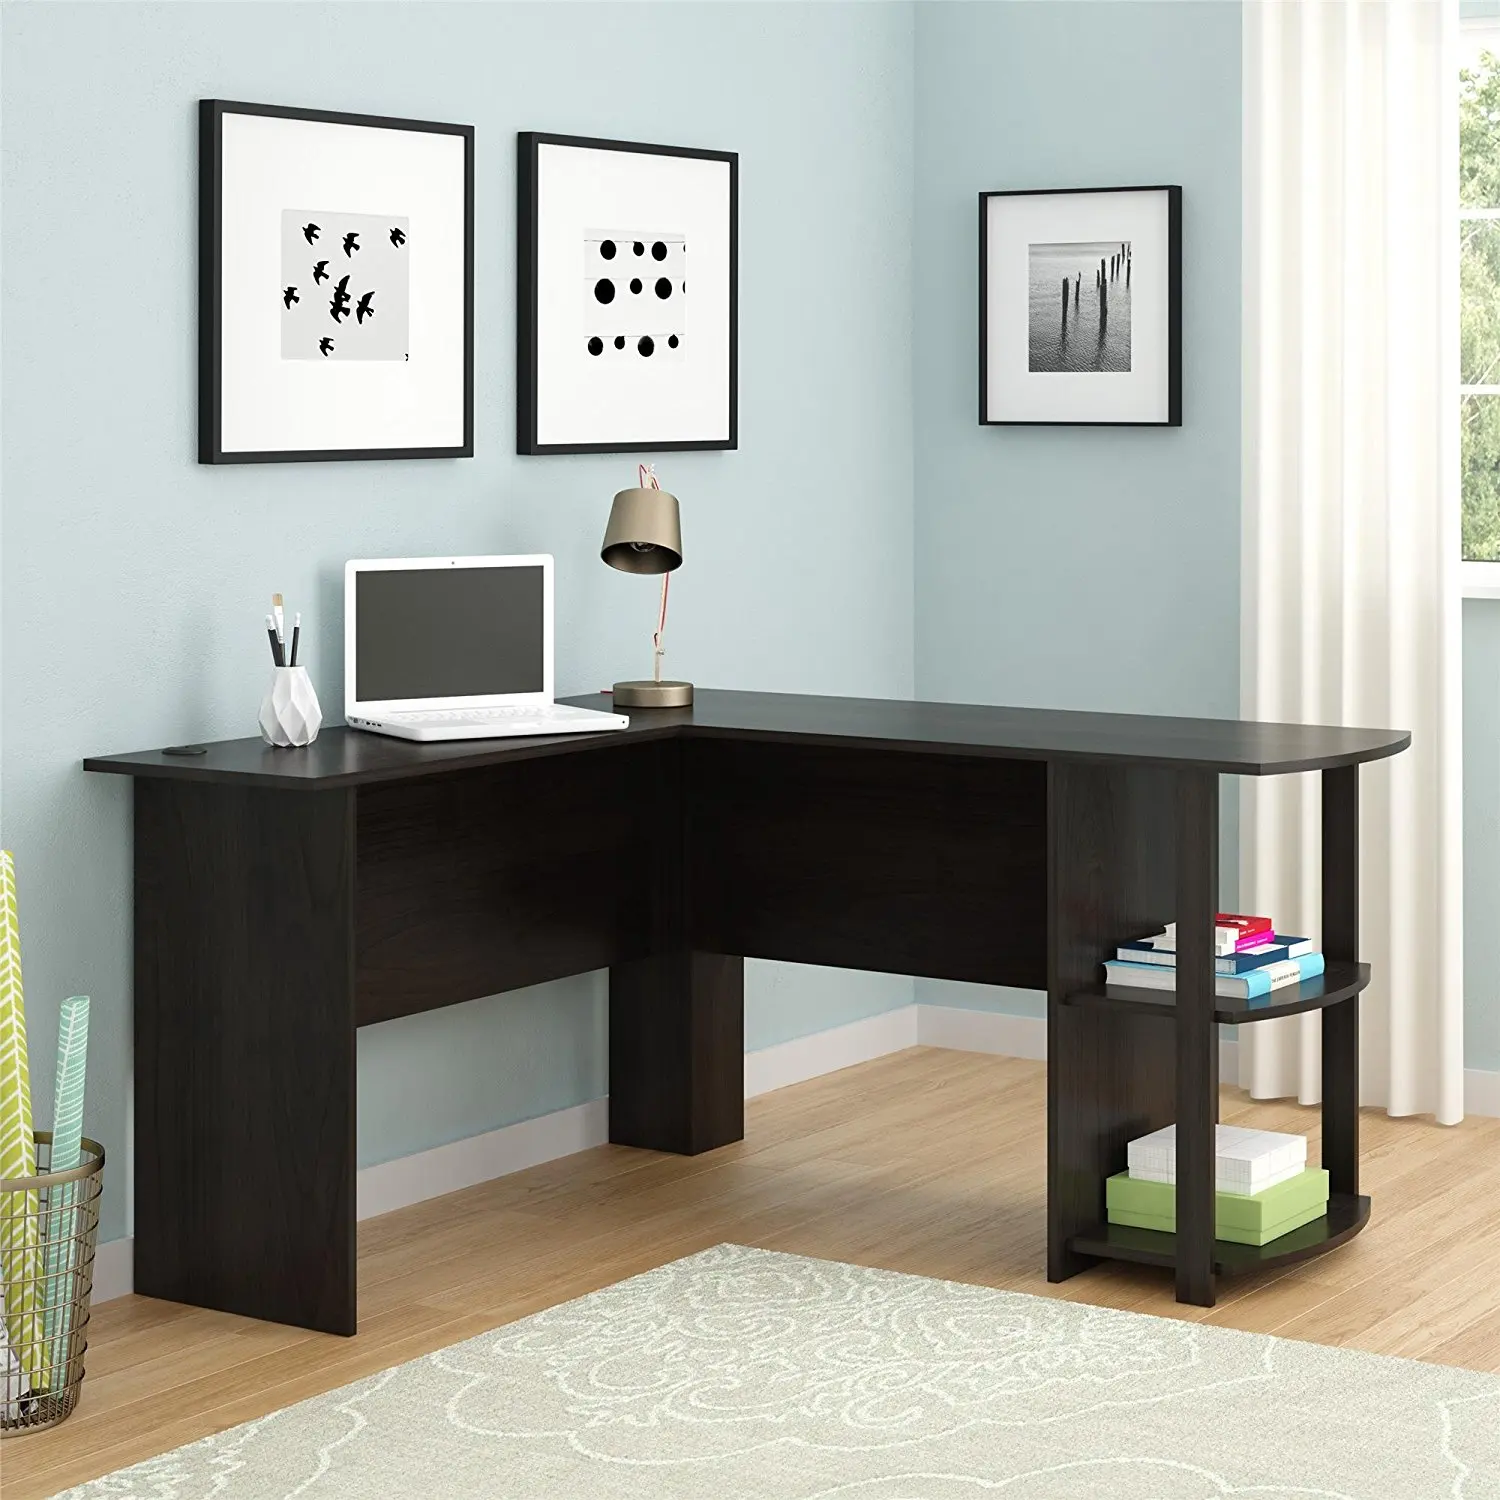 Wooden Home Office L Shaped Desk With Bookshelves Buy Wood